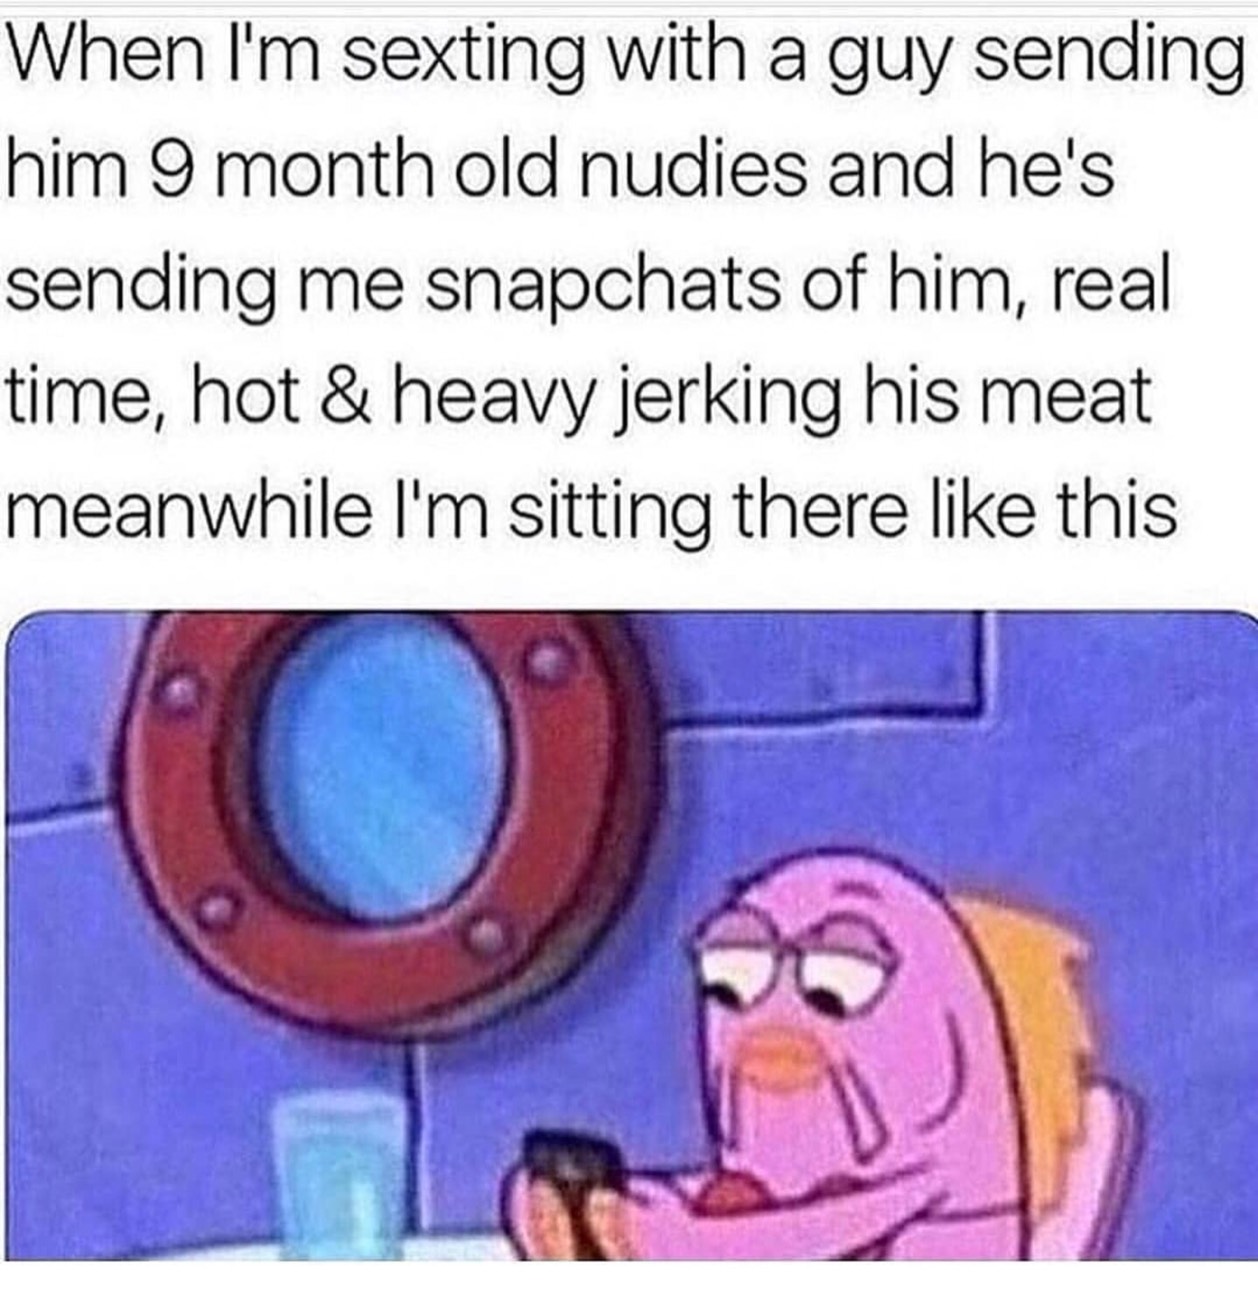 spongebob reaction - When I'm sexting with a guy sending him 9 month old nudies and he's sending me snapchats of him, real time, hot & heavy jerking his meat meanwhile I'm sitting there this